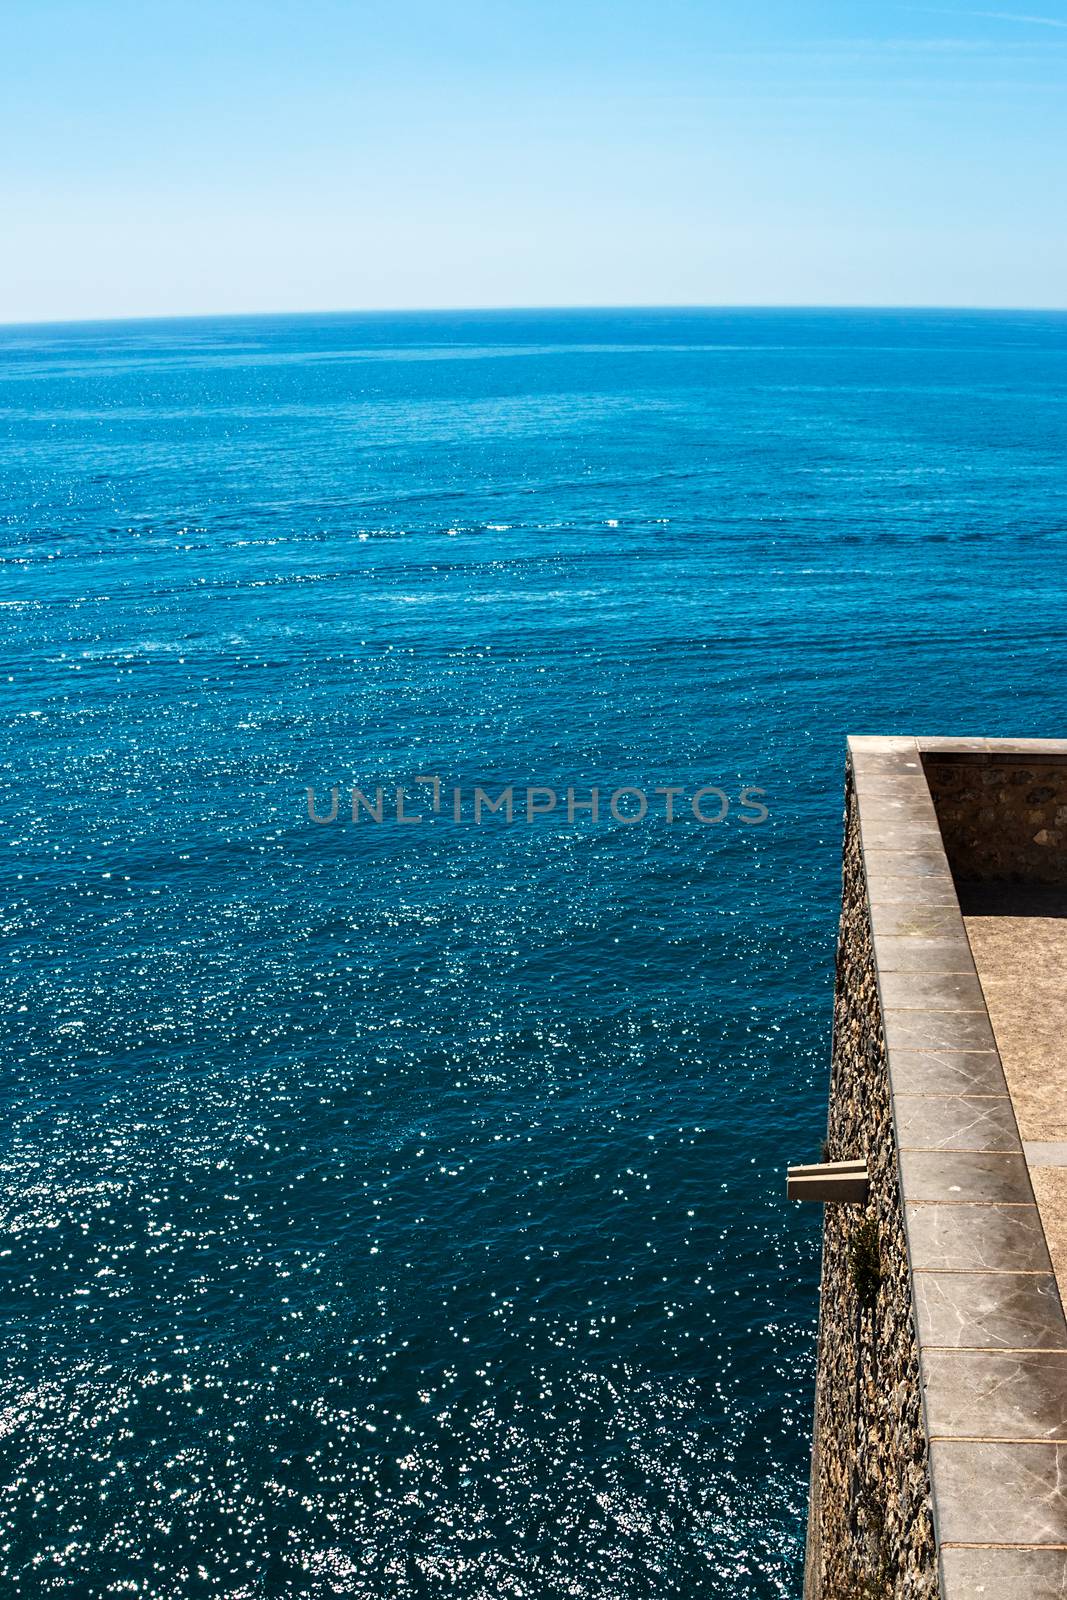 Terrace to contemplate the sea. Vertical image.